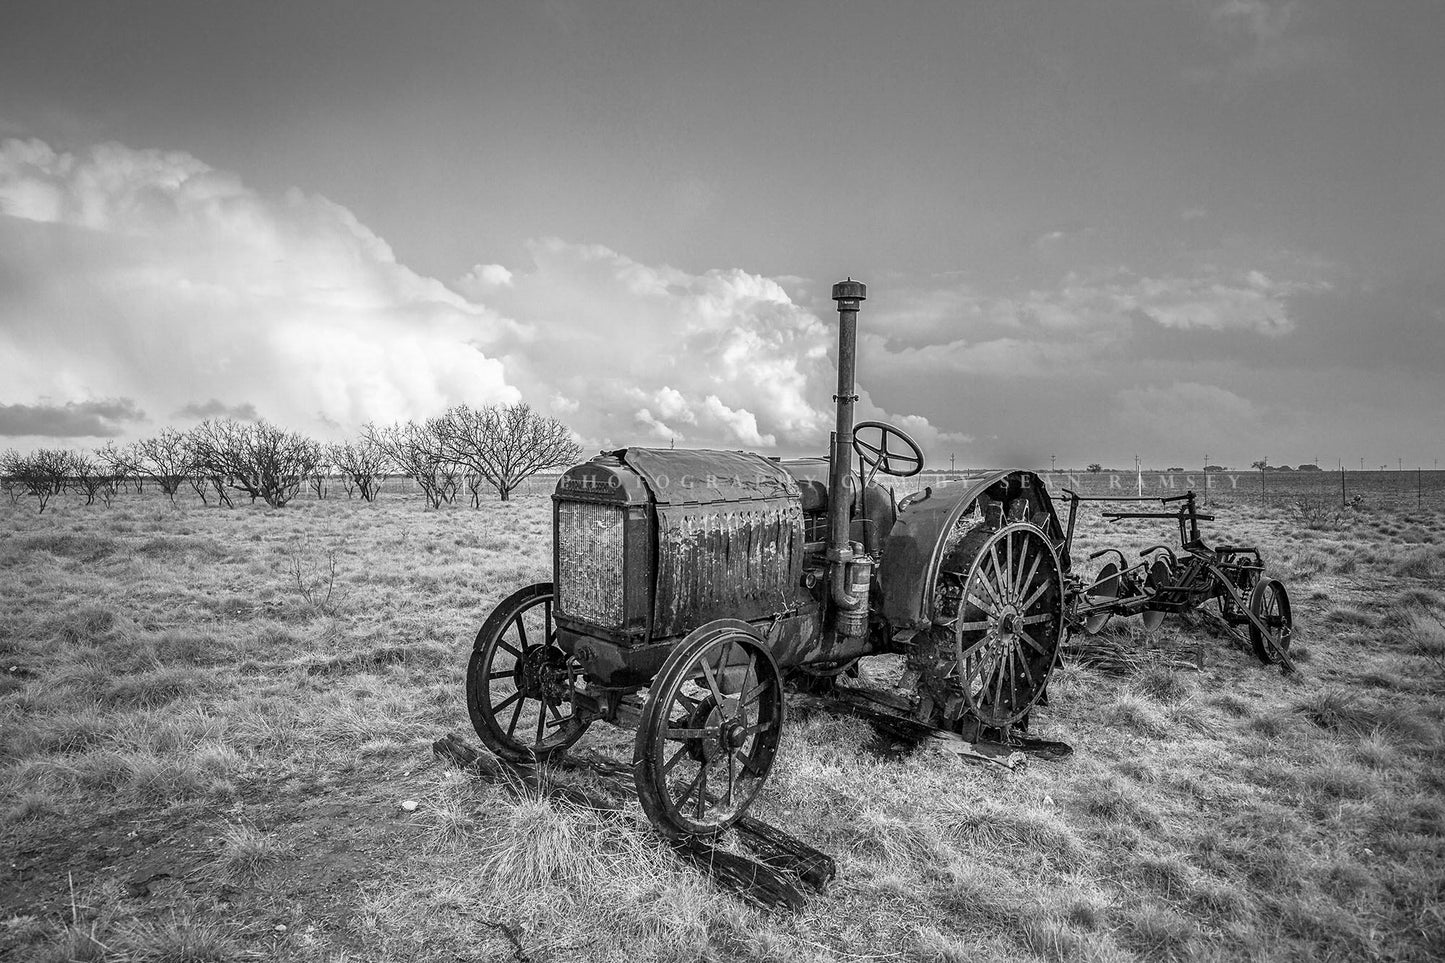 Black and white country photography print of a classic McCormick-Deering tractor sitting in a field on a stormy spring day in Texas by Sean Ramsey of Southern Plains Photography.